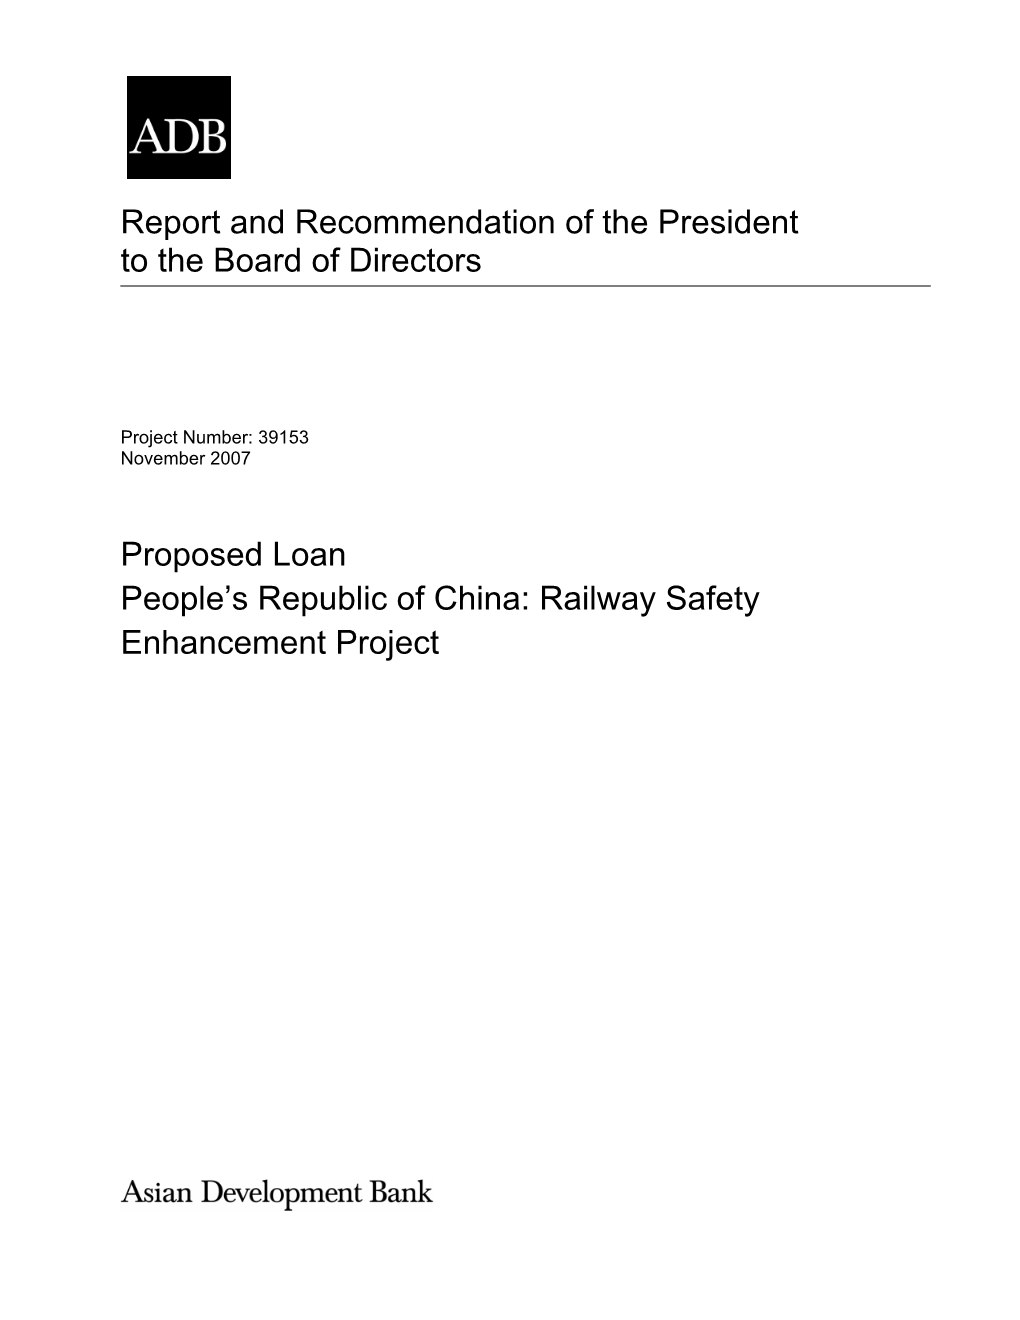 Railway Safety Enhancement Project (The Project) Is a Priority Project Included in the Eleventh Five Year Plan (FYP), 2006–2010, of the Government